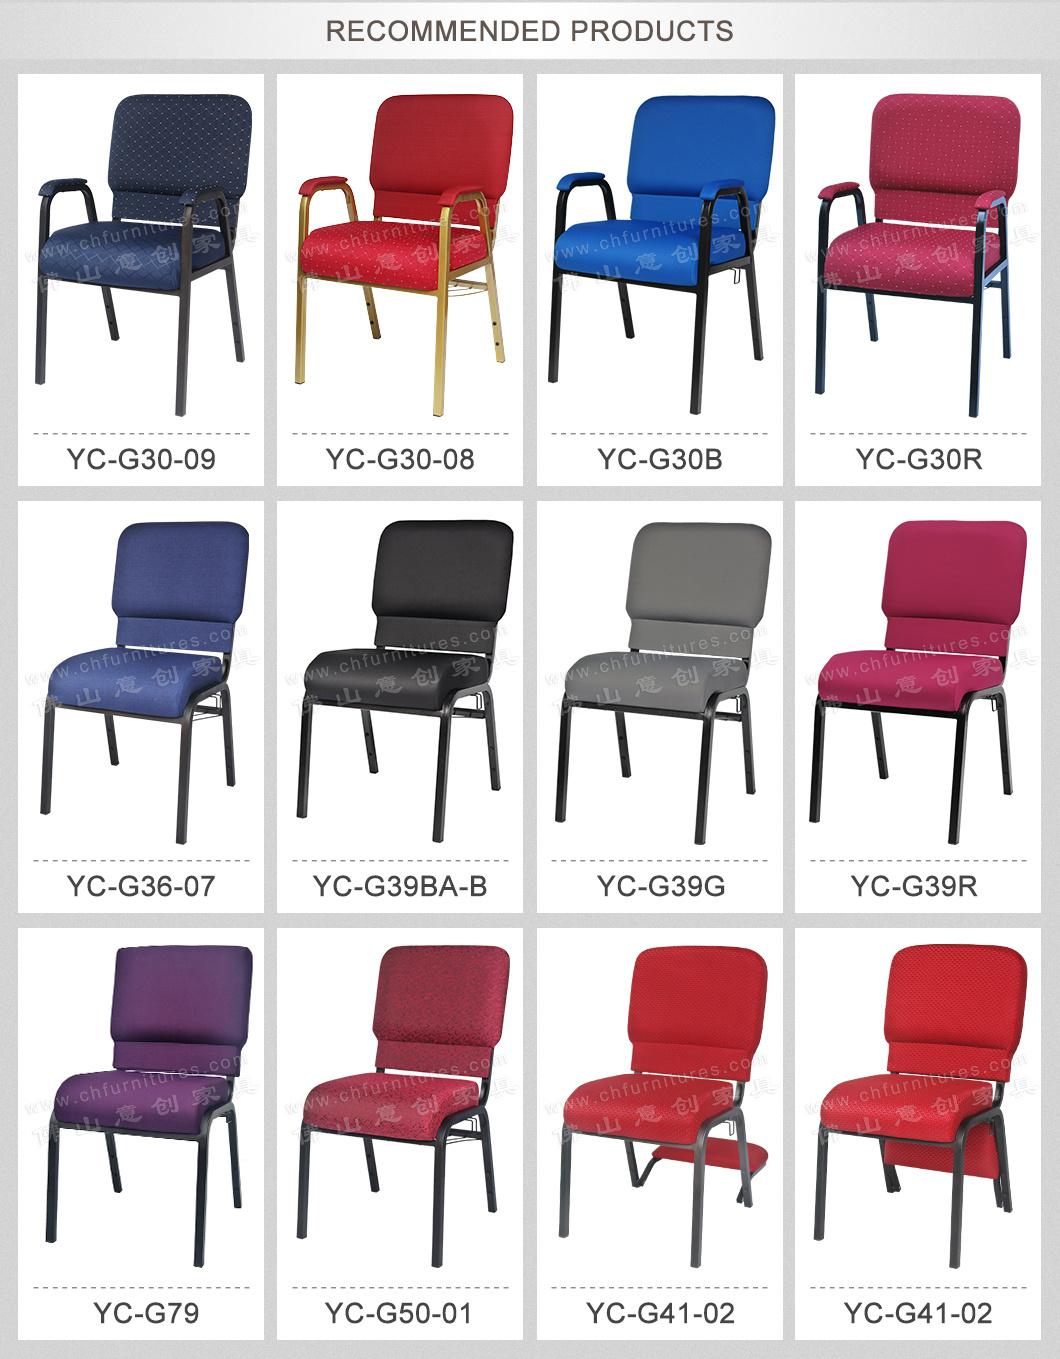 Yc-G70 Black Fabric Cheap Used Stackable Church Chairs Price